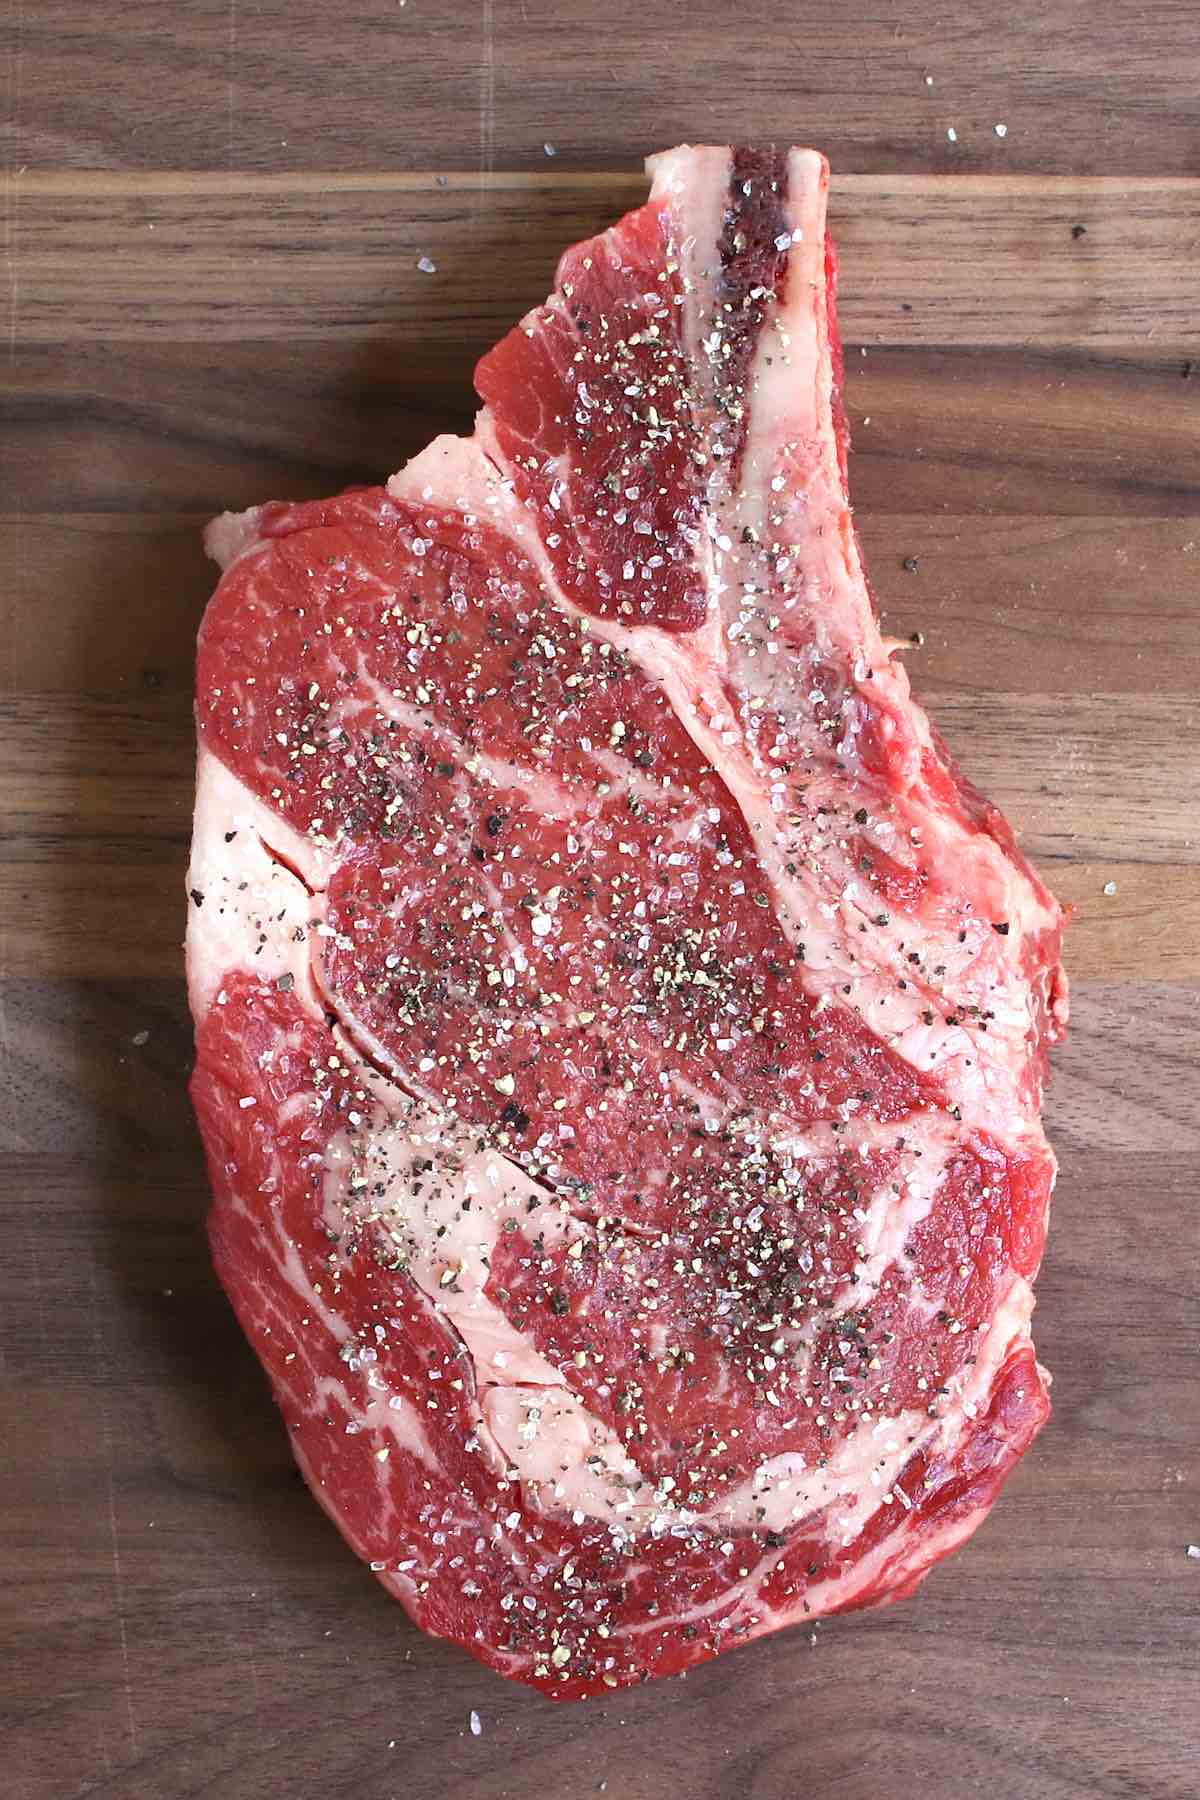 Thick cut ribeye seasoned with coarse salt and black pepper, ready for cooking